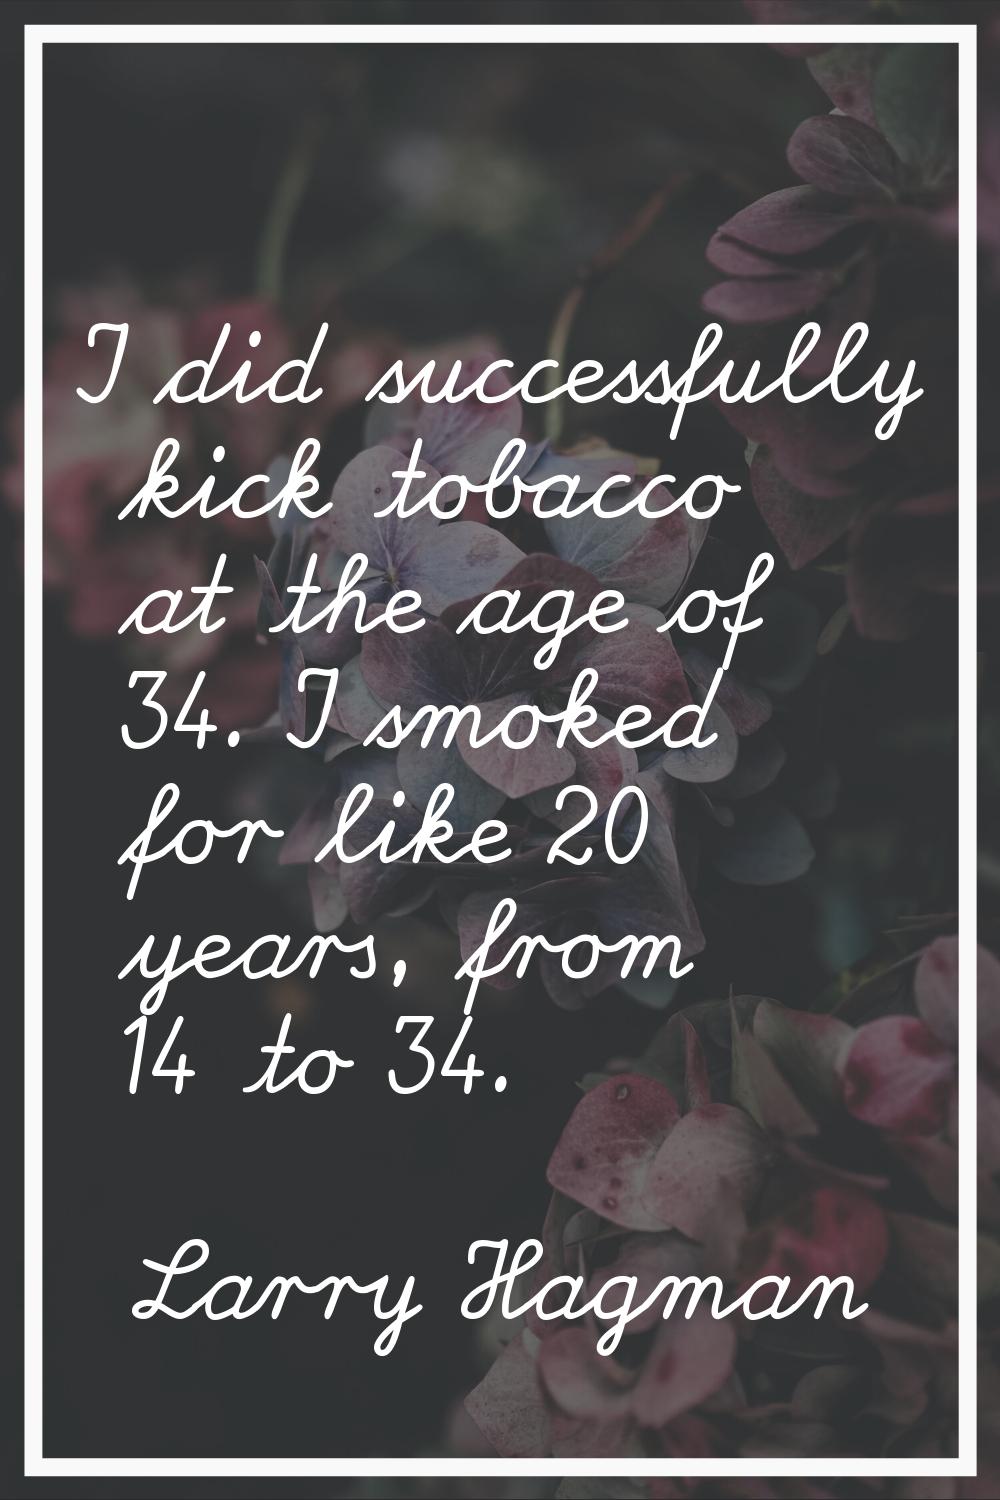 I did successfully kick tobacco at the age of 34. I smoked for like 20 years, from 14 to 34.